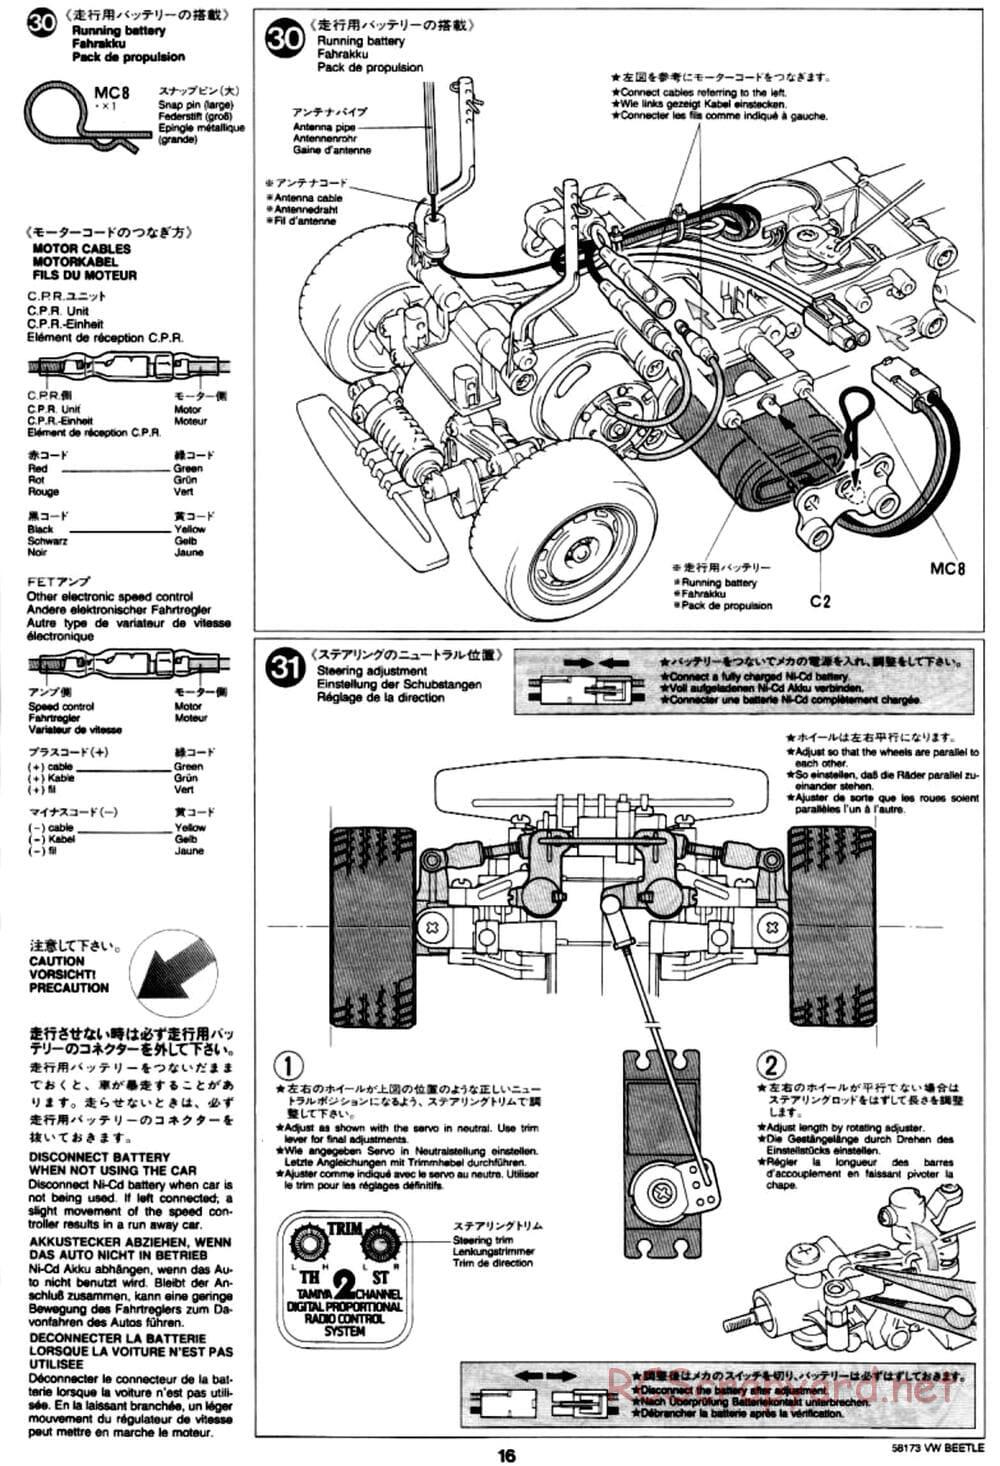 Tamiya - Volkswagen Beetle - M02L Chassis - Manual - Page 16